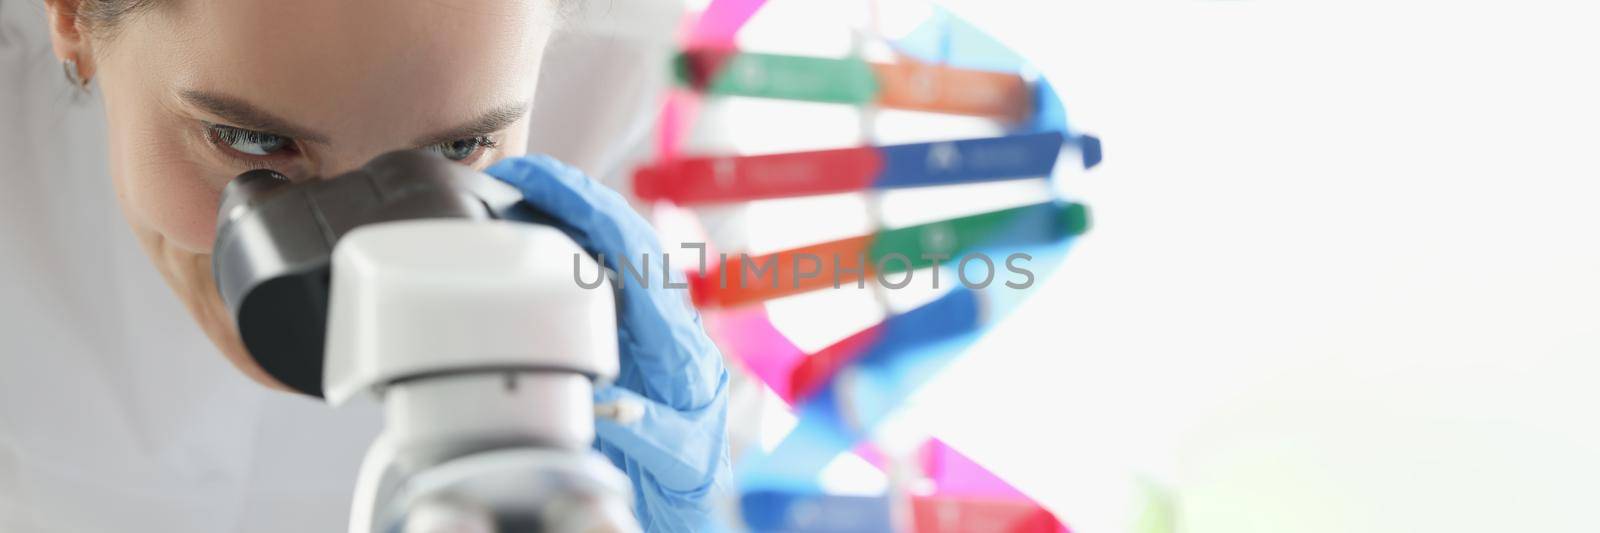 Woman scientist looking through microscope near dna molecule mockup in lab. Scientific genetic research concept